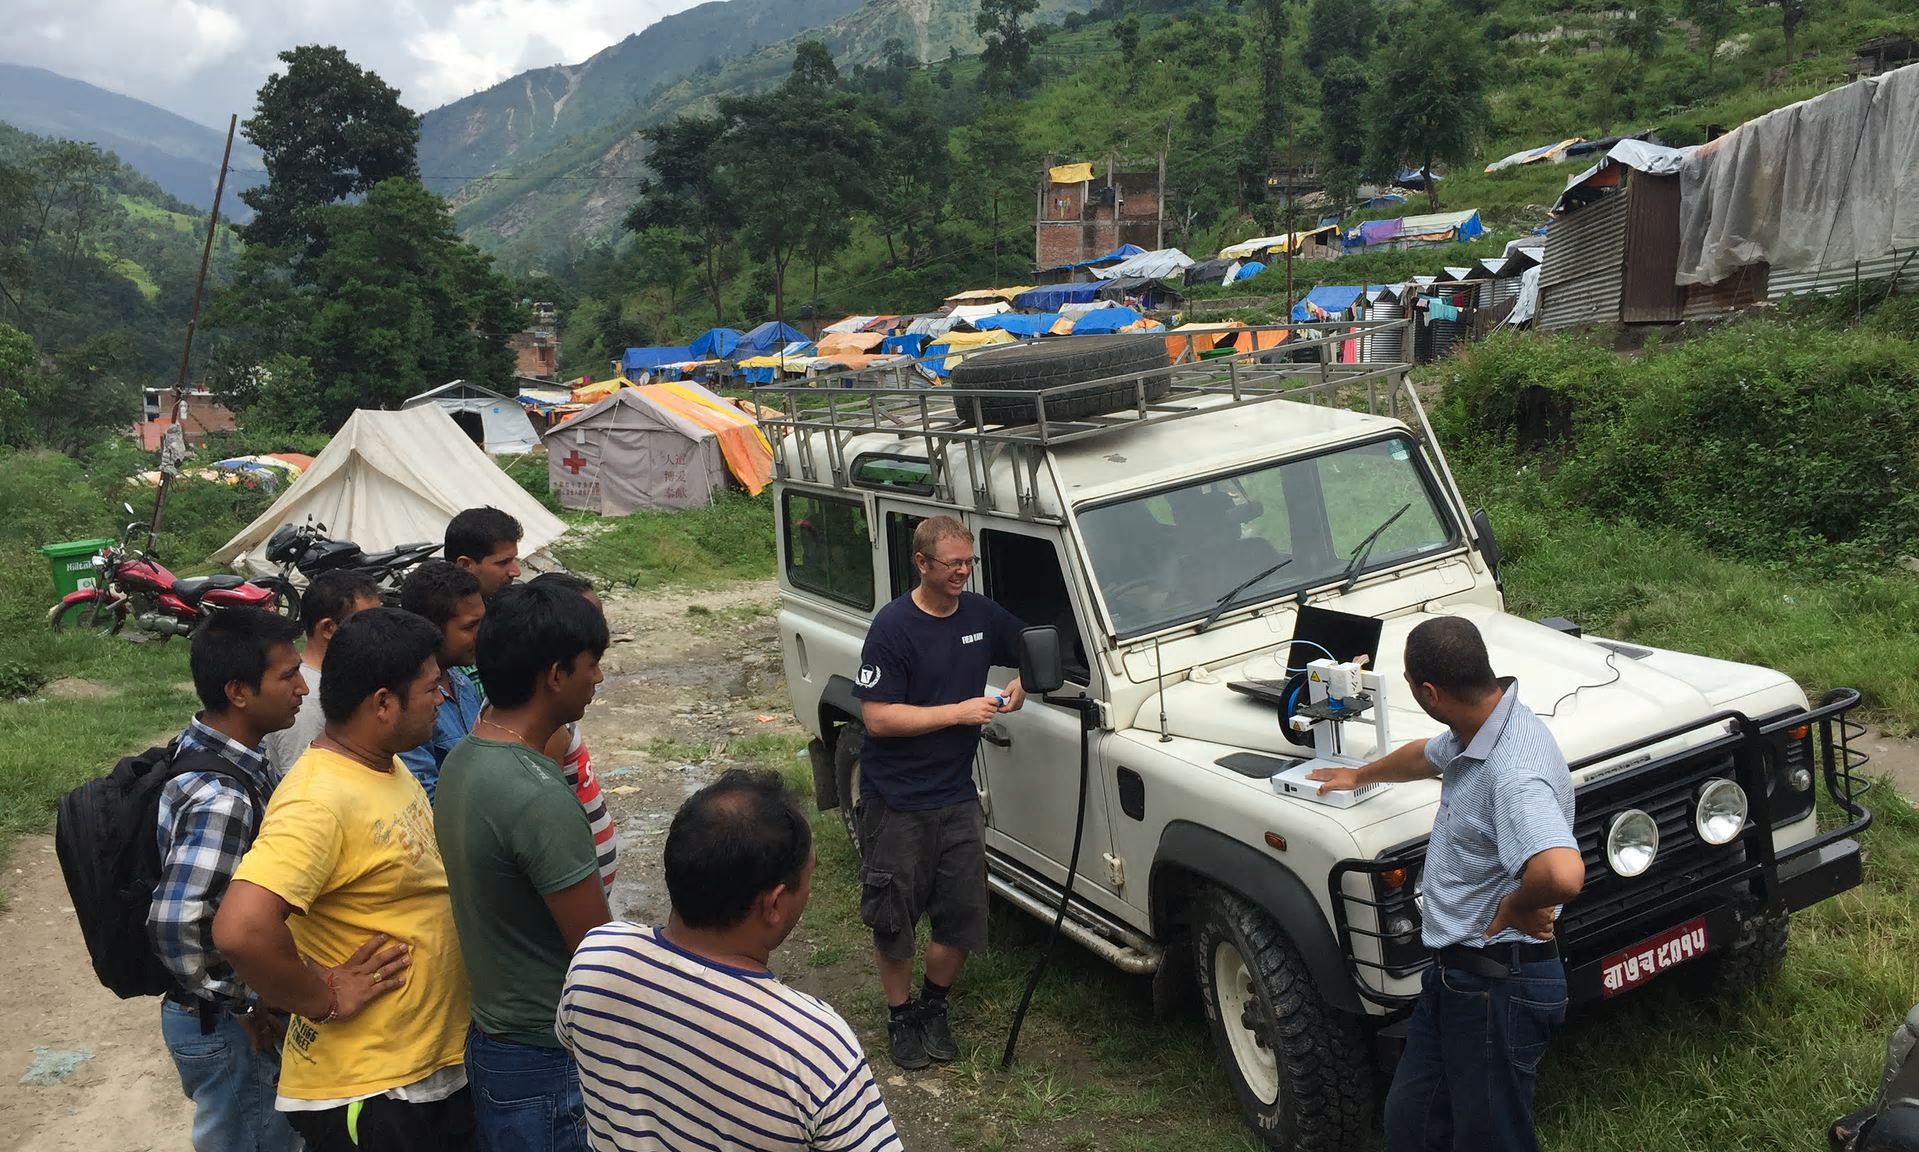 A 3D printer is used to create a fitting for a leaky water pipe in a camp for displaced people in Nepal